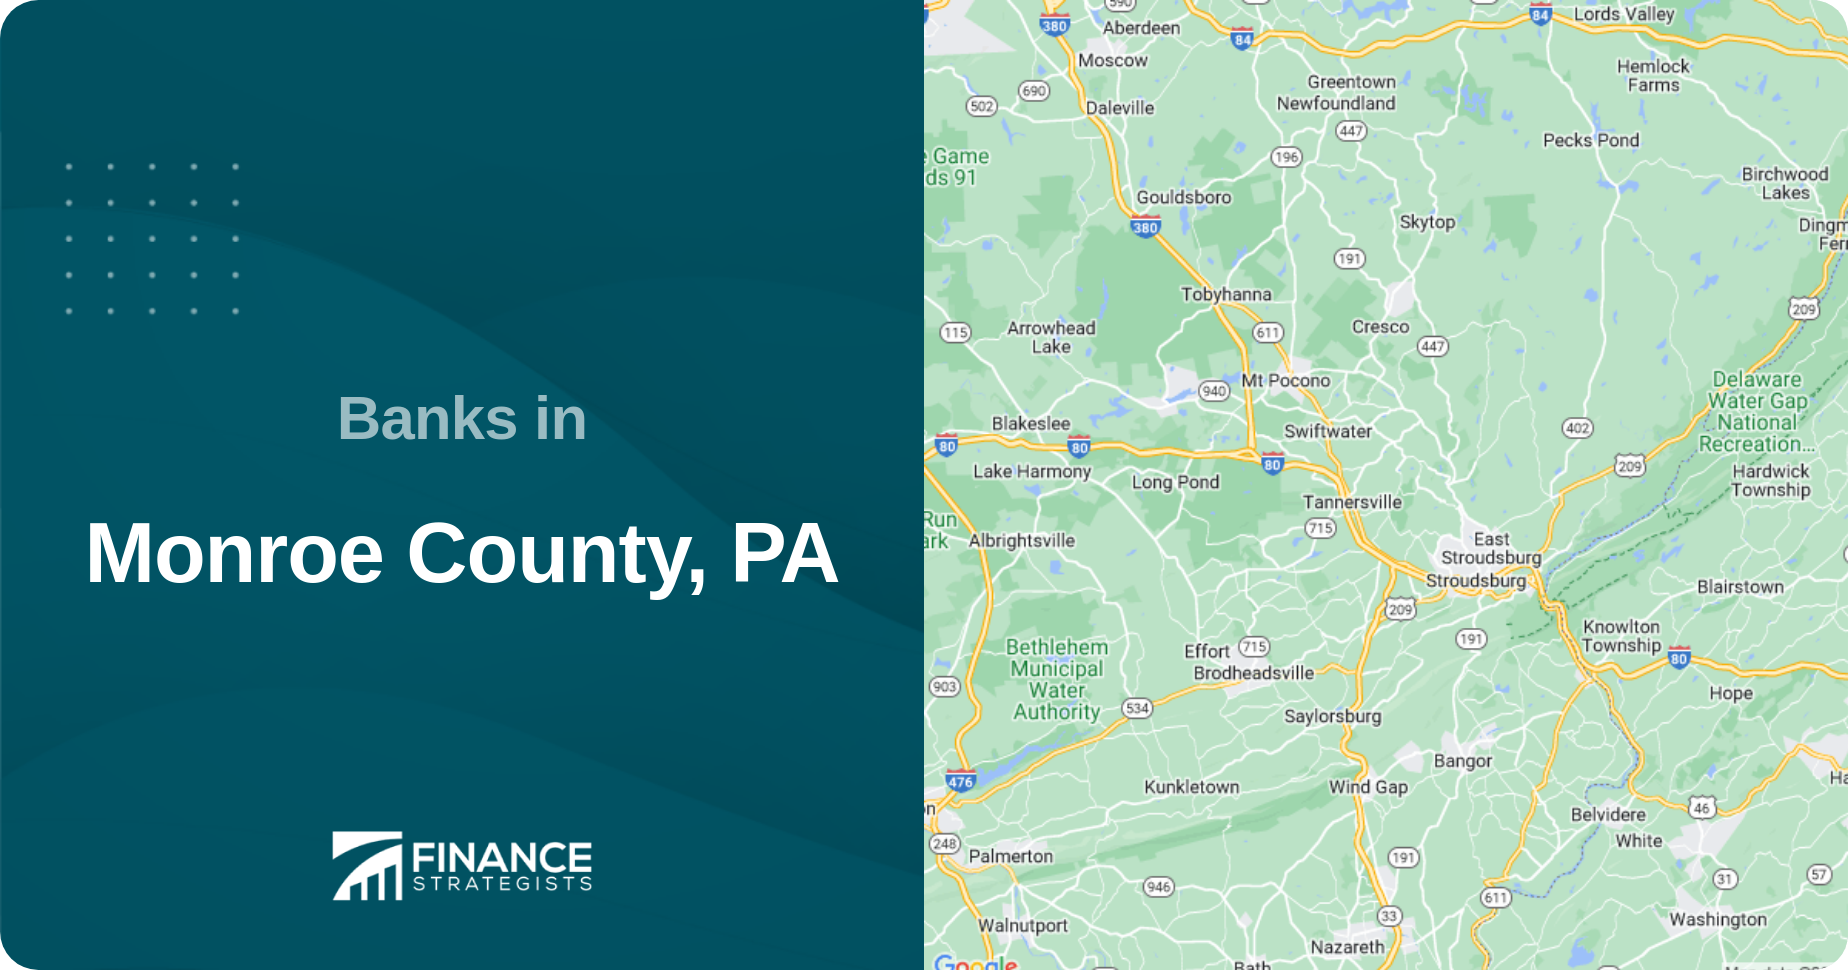 Banks in Monroe County, PA